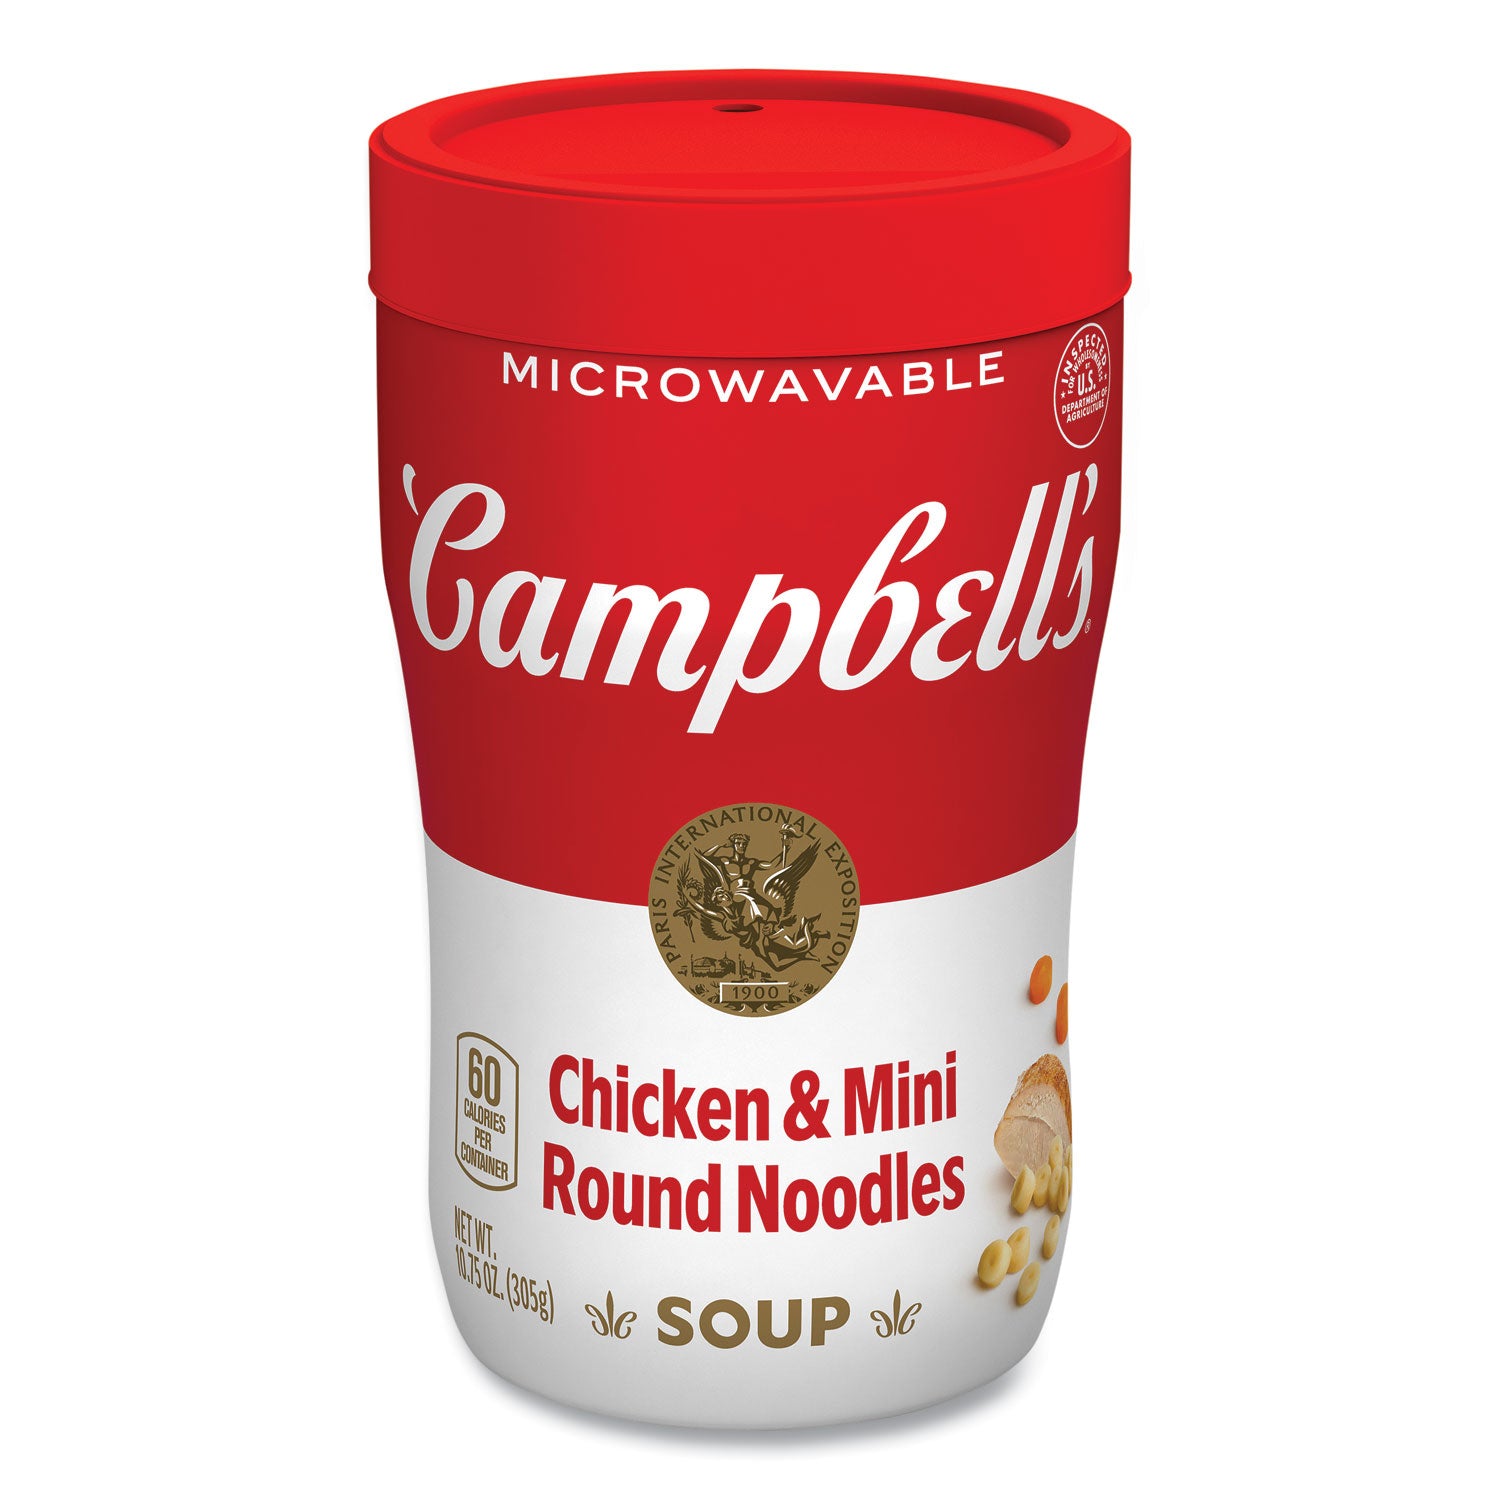 soup-on-the-go-chicken-with-mini-noodles-1075-oz-cup-8-carton-ships-in-1-3-business-days_grr35100007 - 3